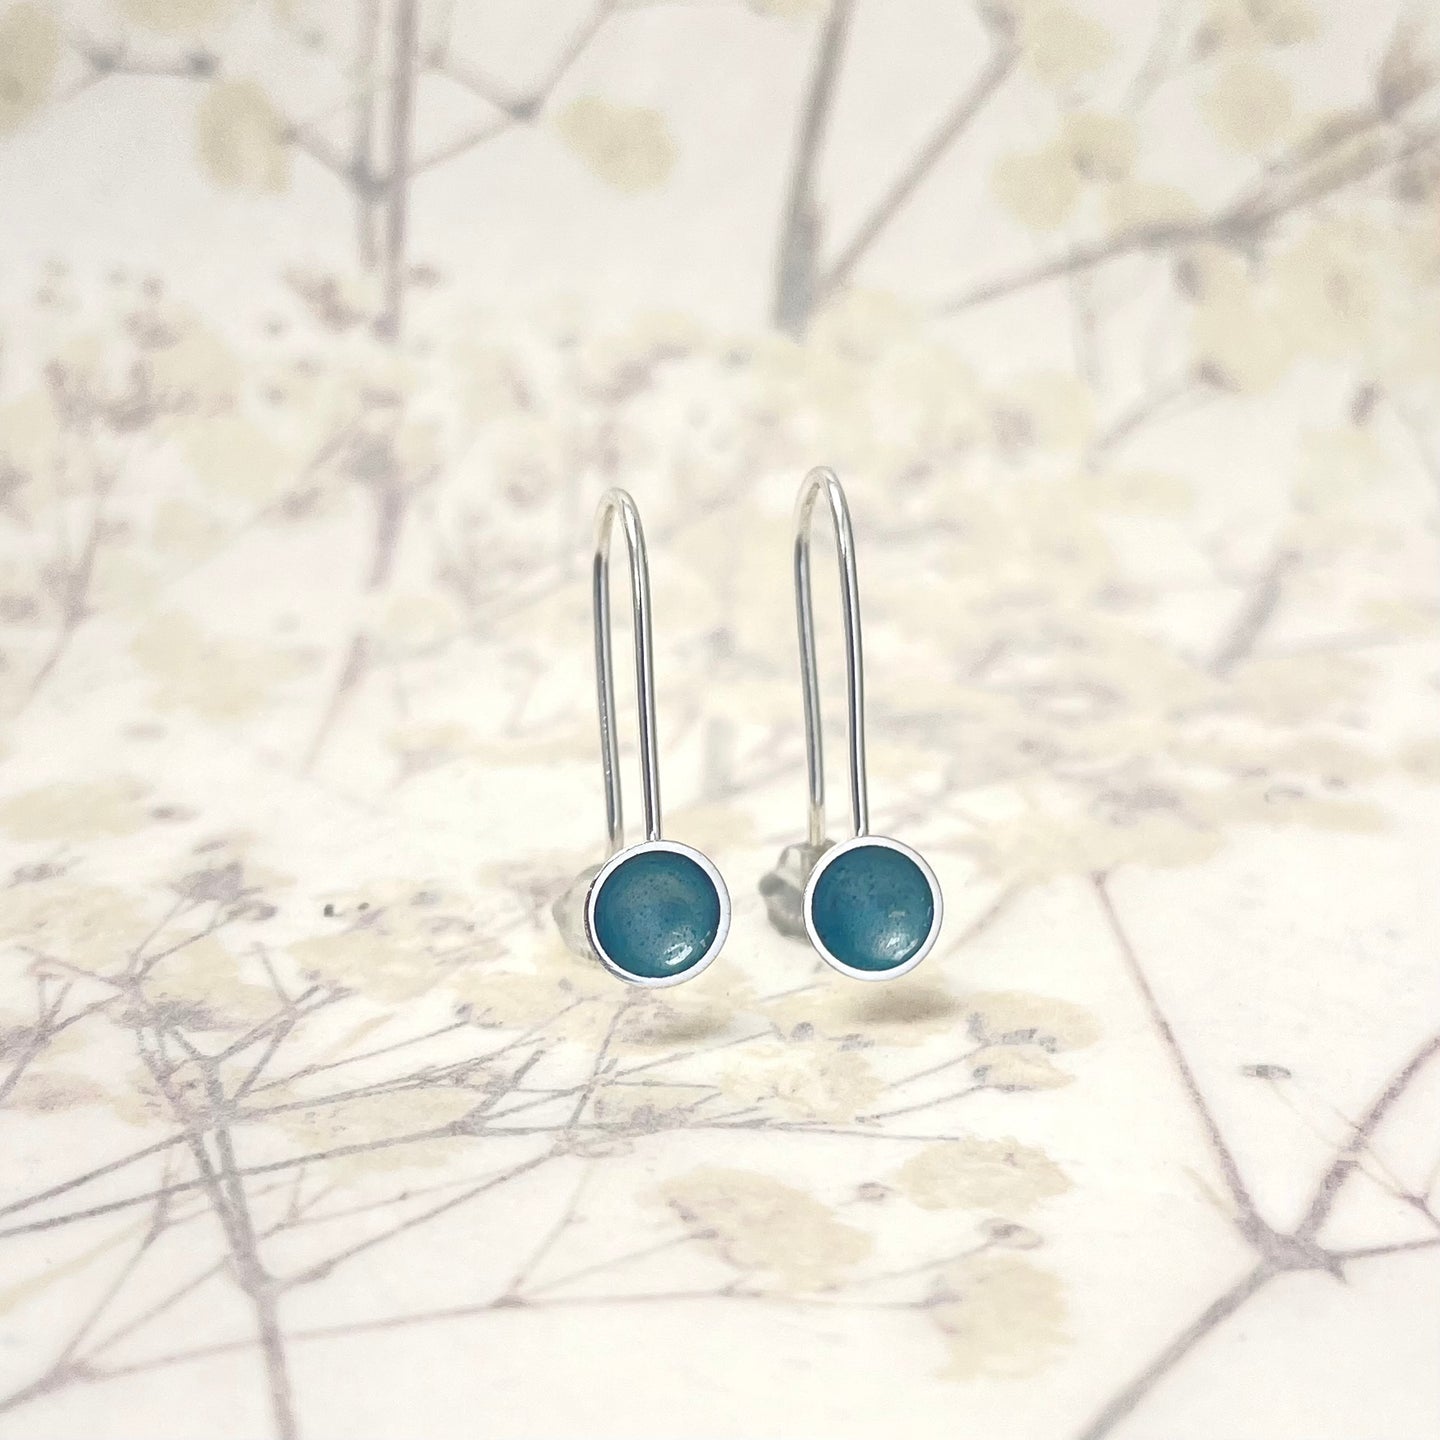 Silver and ice blue drop earrings